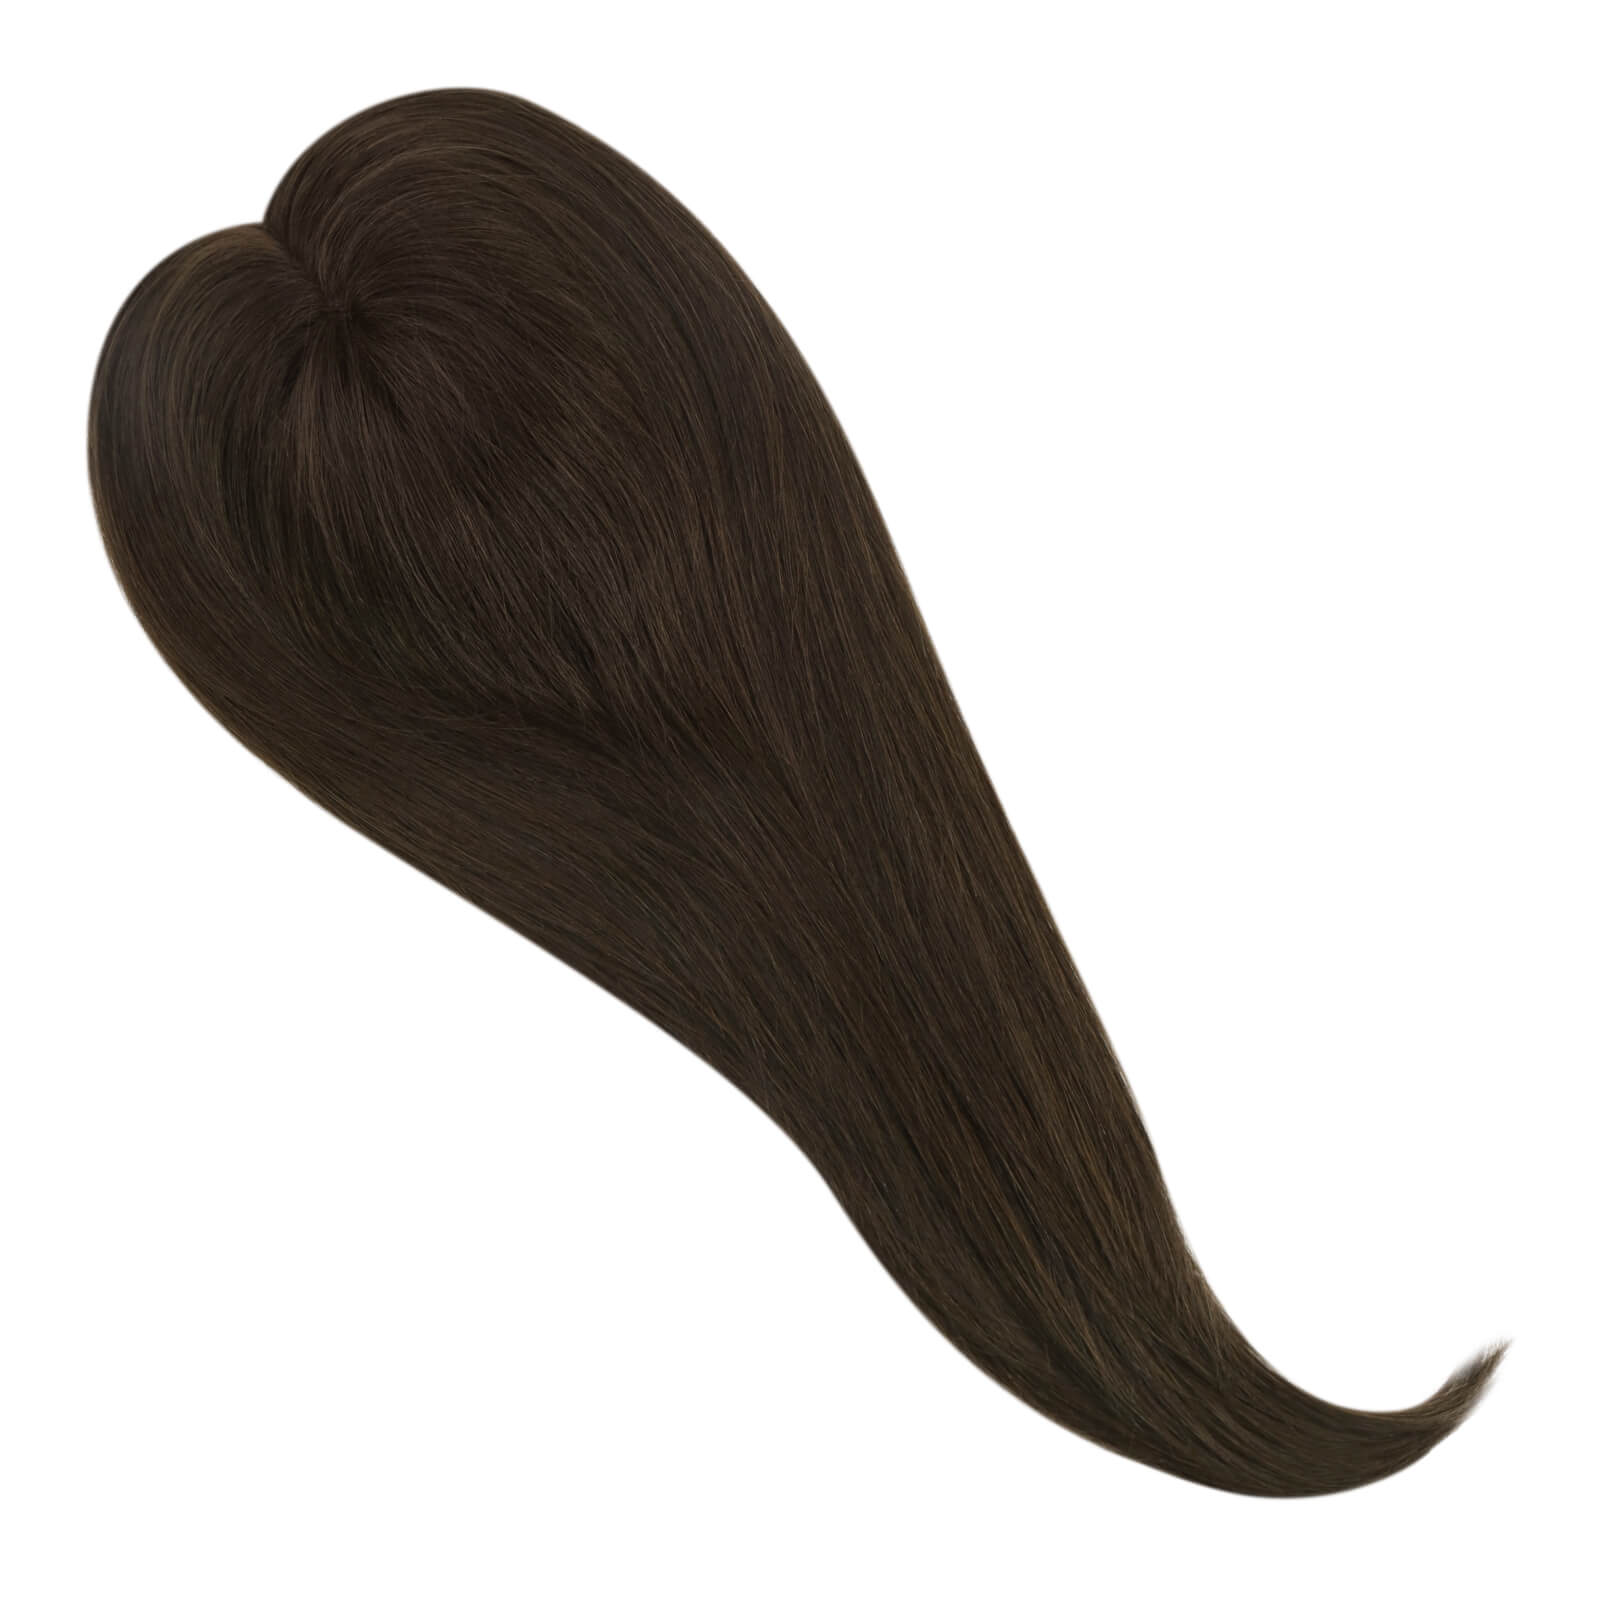 mono topper hair,Mono Topper,human hair topper,high quality virgin hair extensions,hair topper women,hair topper wig,hair topper silk base,hair topper,best hair extensions,hair extensions for thin hair,best clip in hair extensions,clip-in hair extensions,18 inch hair extensions,dark brown hair extensions,dark brown topper hair,distribute seams at will,invisible topper,large base topper,large base 6*7 inch